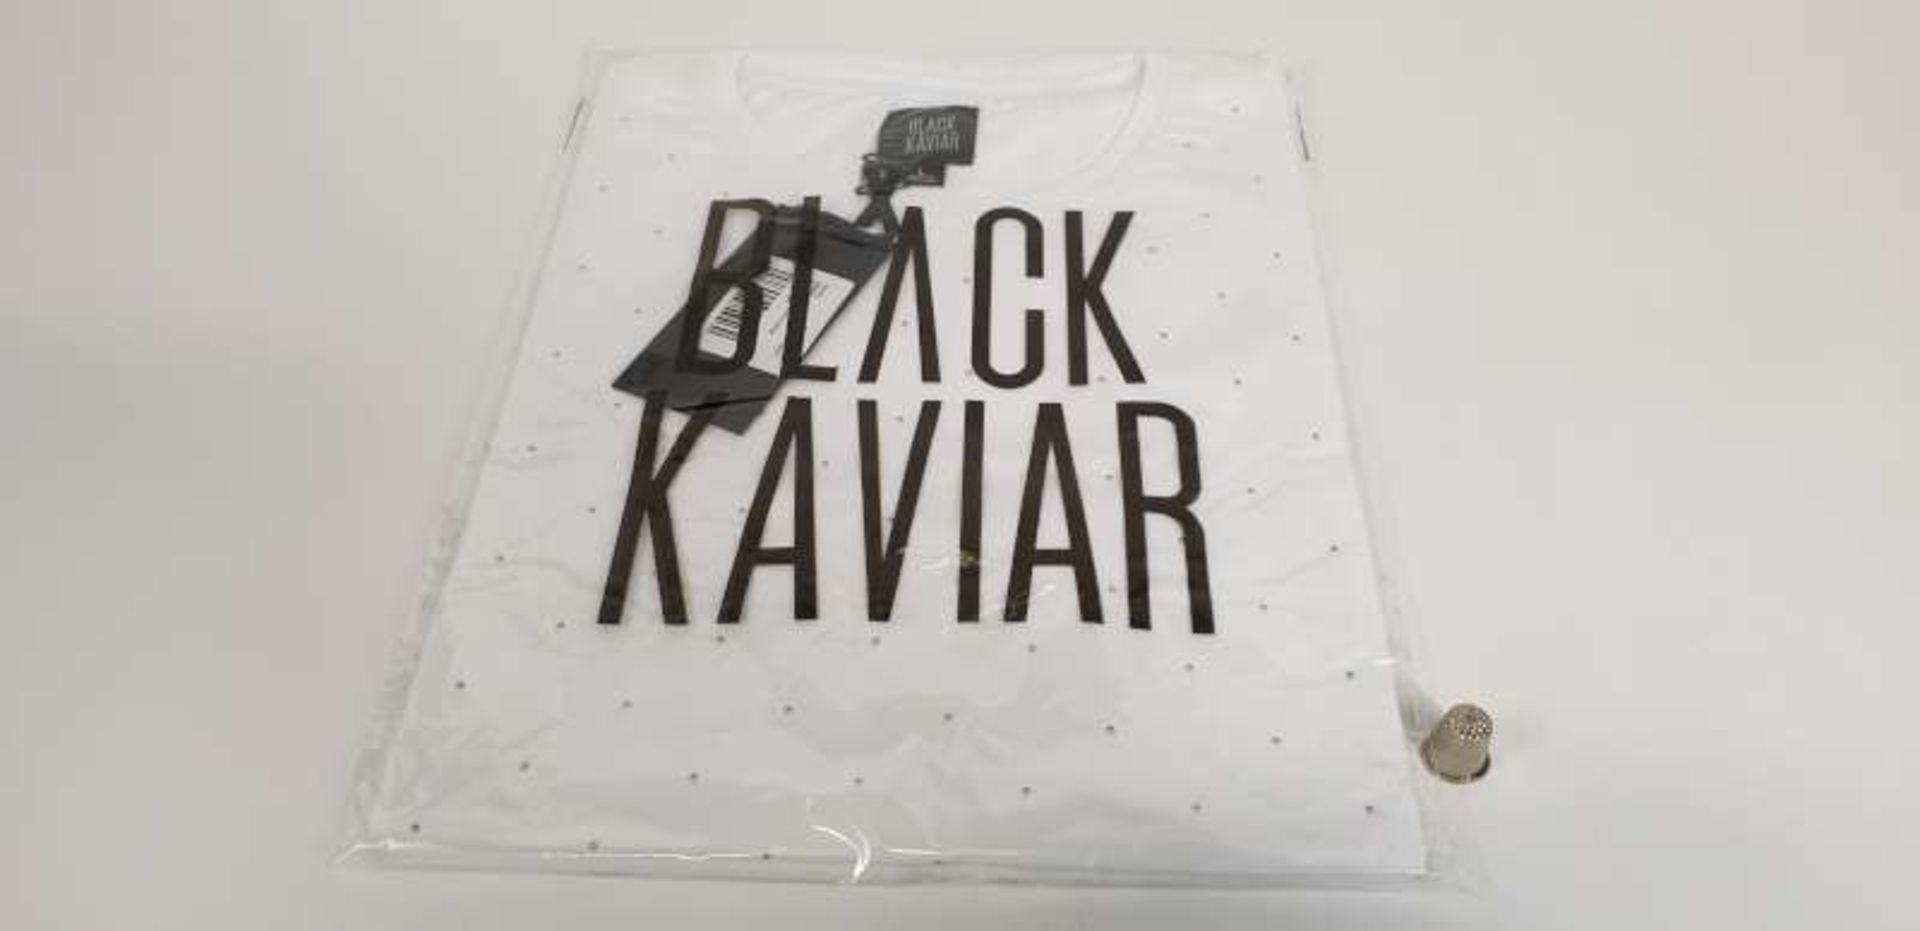 10 X BRAND NEW BLACK KAVIAR T SHIRTS IN WHITE WITH CRYSTALS IN VARIOUS SIZES